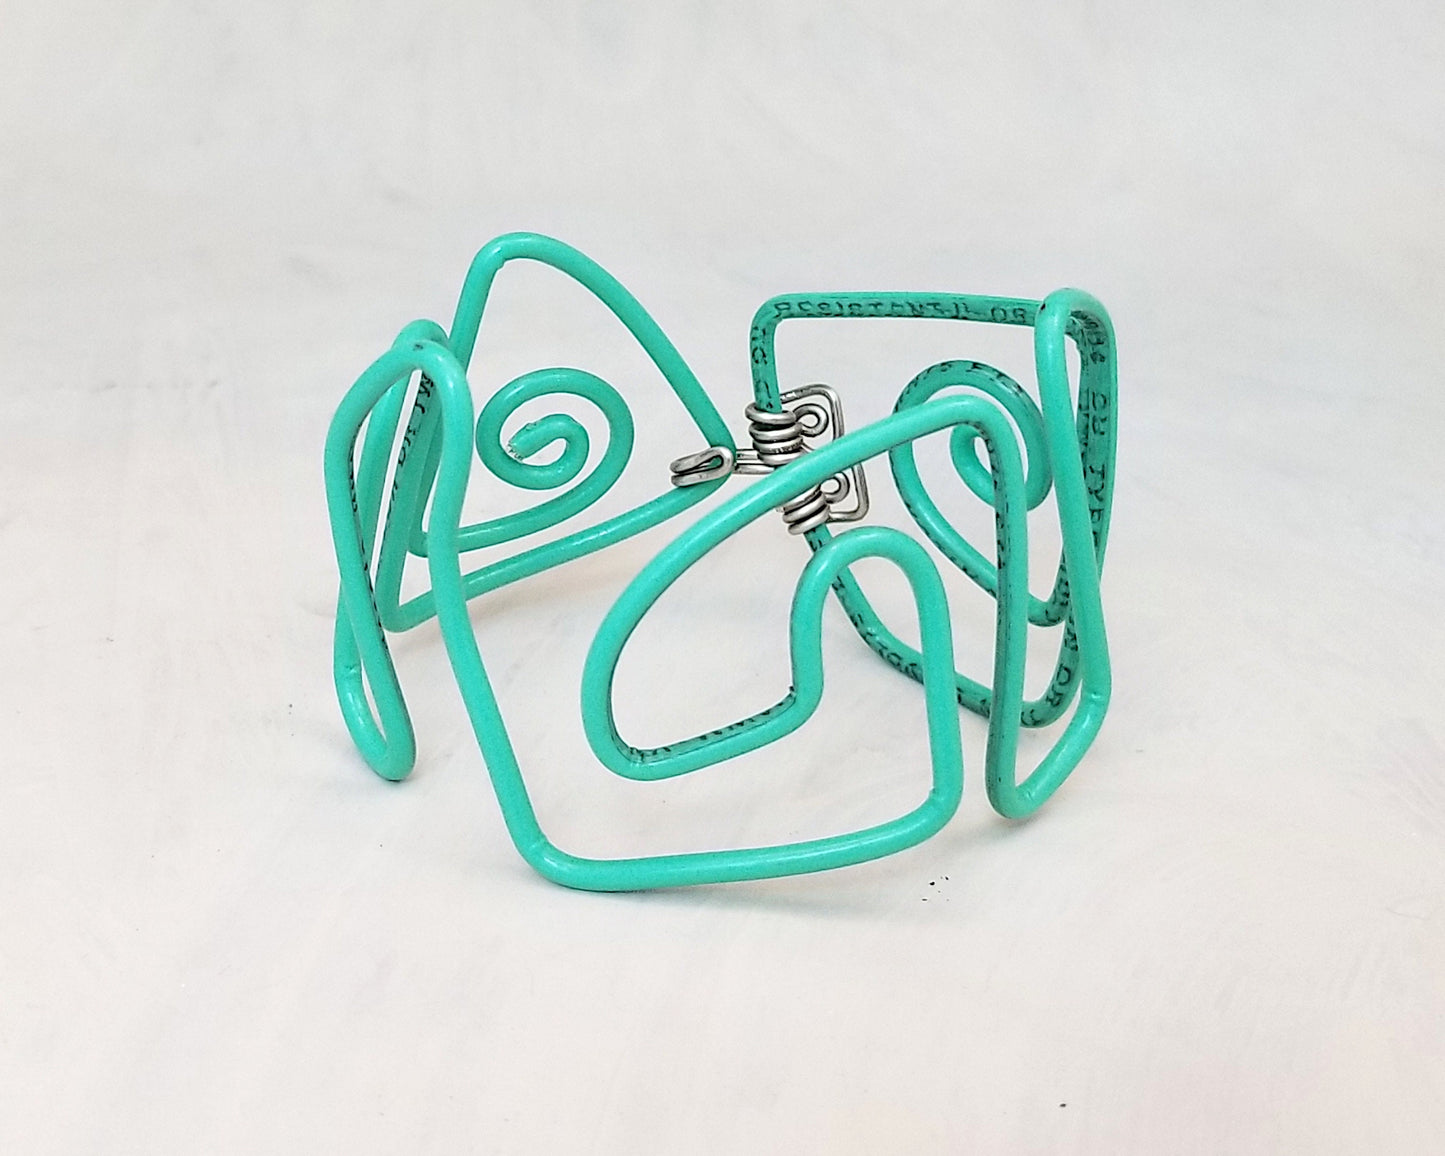 Minimalist Statement Wire Cuff, Tall Waves Design, Adjustable, Lightweight, Choice of Colors